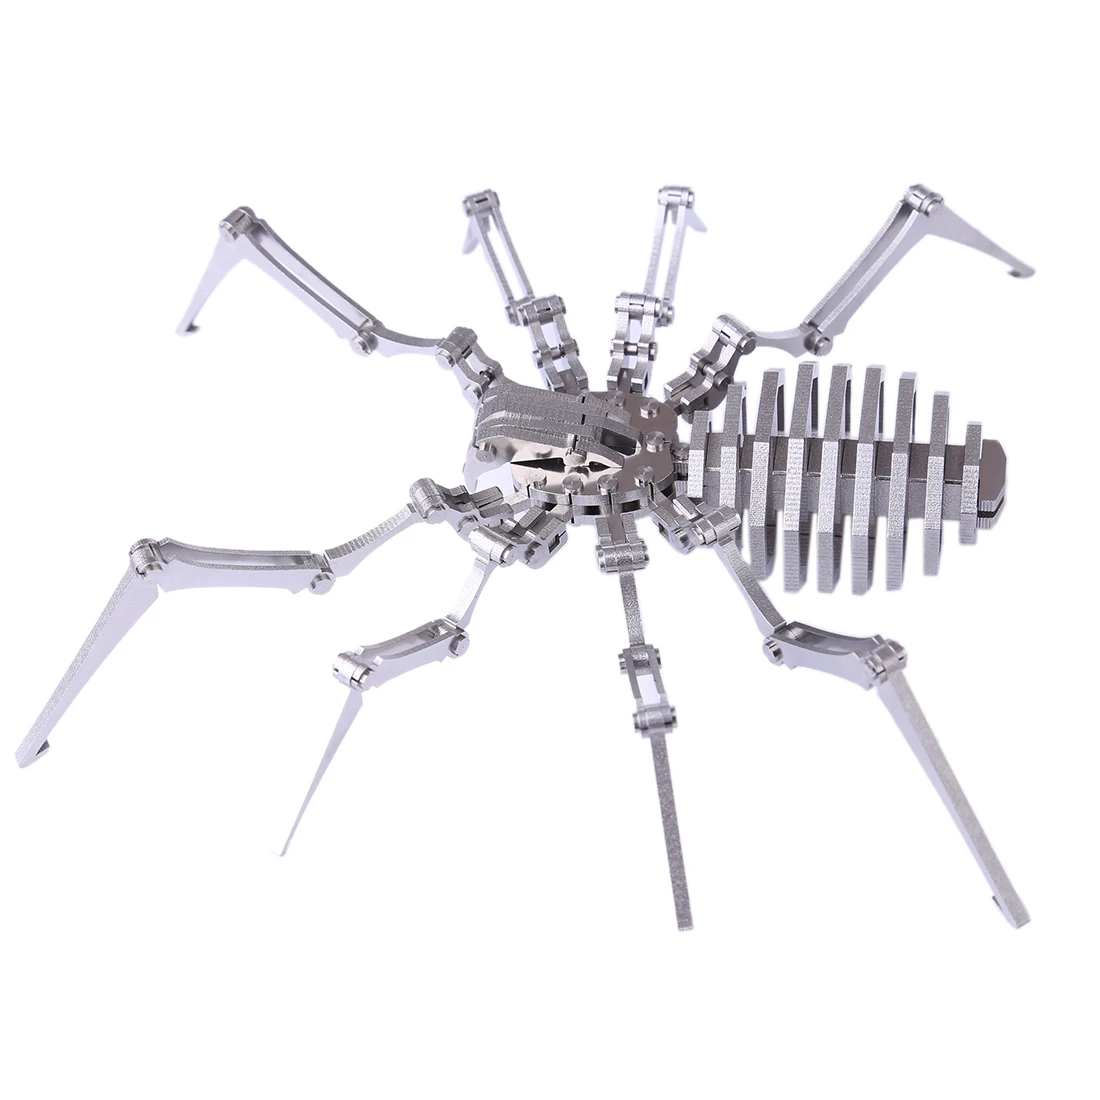 DIY Assemble Model Kit 3D Stainless Steel Assembly Detachable Models Puzzle Home Ornaments Best Gift 2019 - Spider King